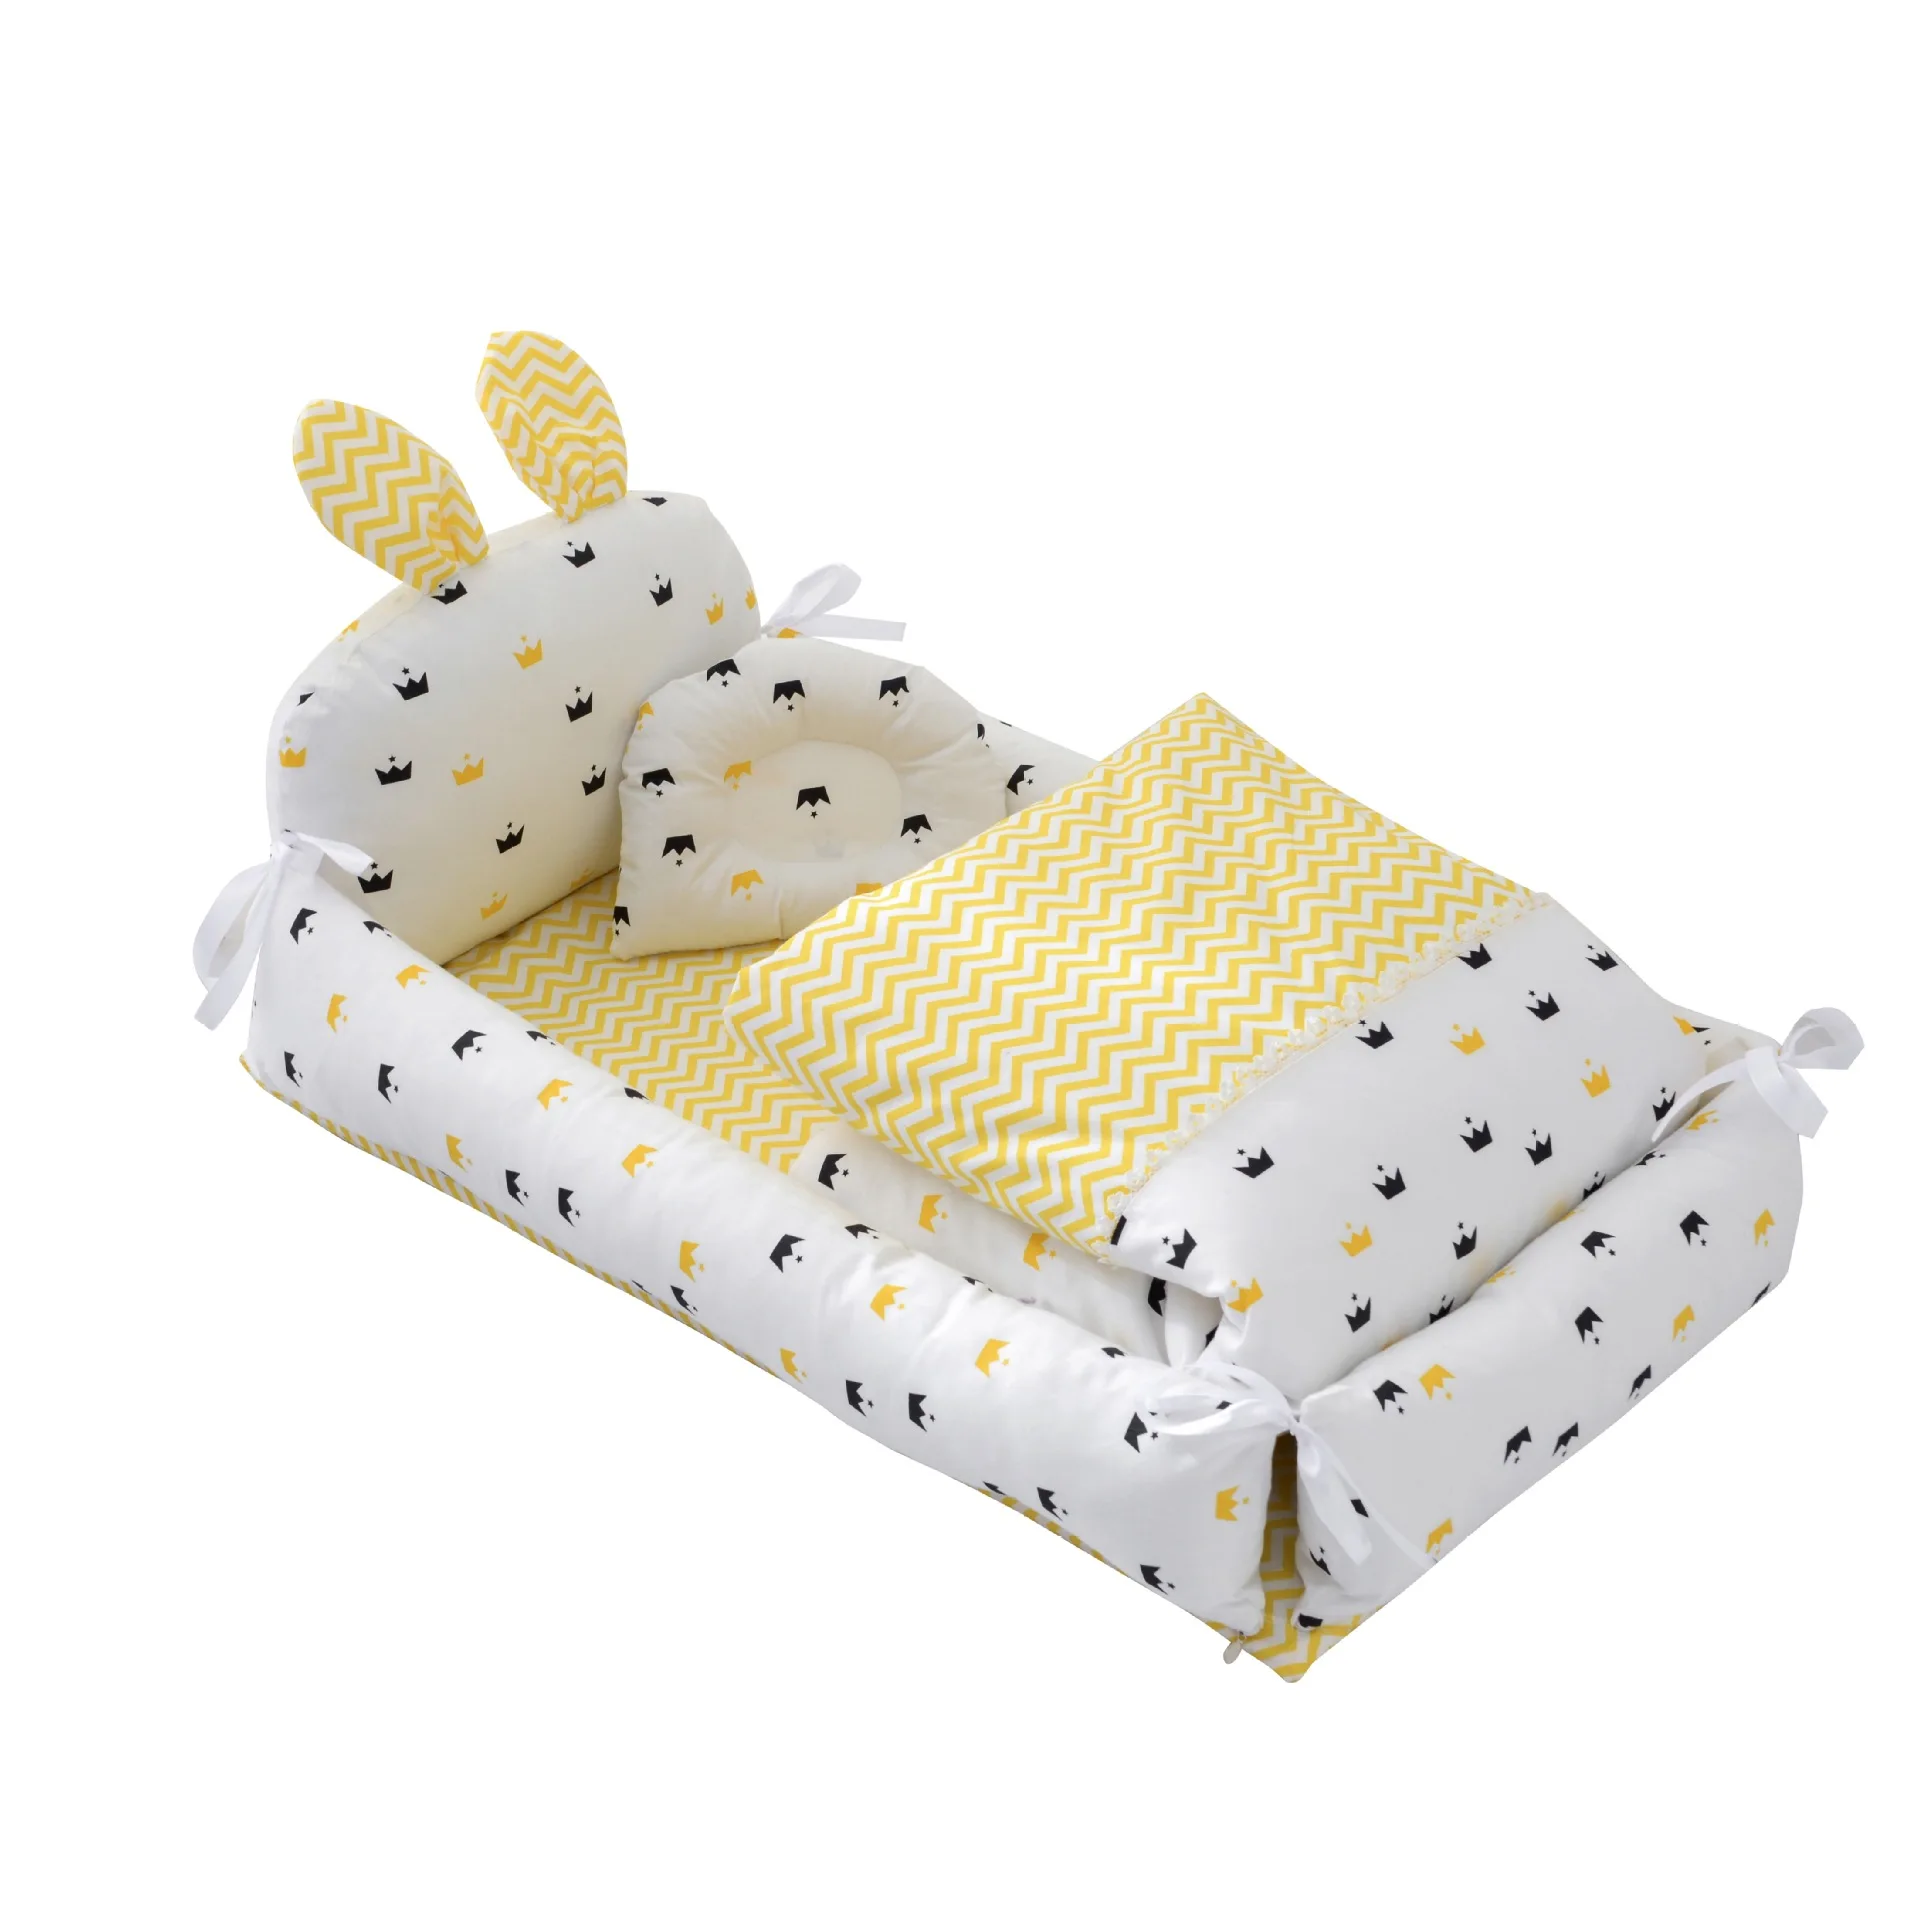 Portable Crib Bed In Bed Cartoon Cute Bionic Uterus Crib Adjustable and Washable Bed  Baby Playpen